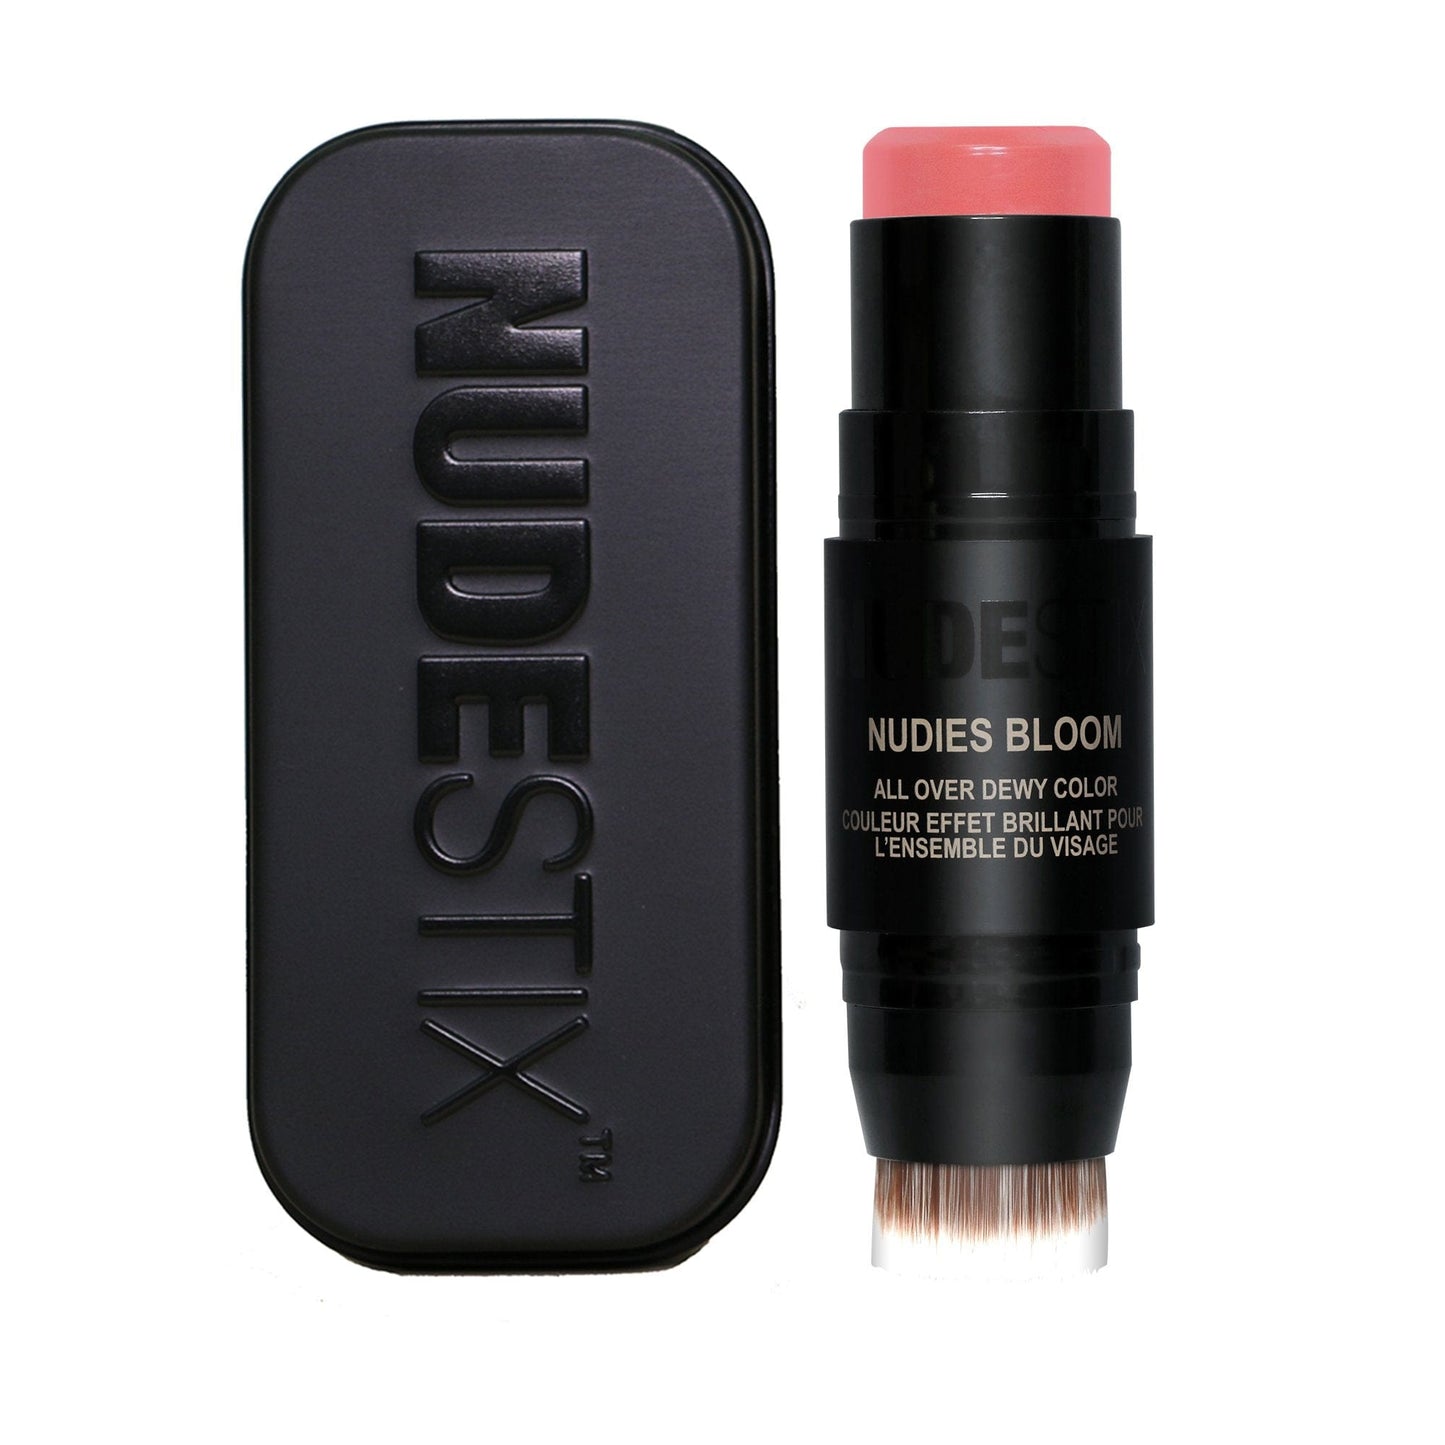  Nudies Bloom in shade Cherry Blossom Babe with Nudestix can